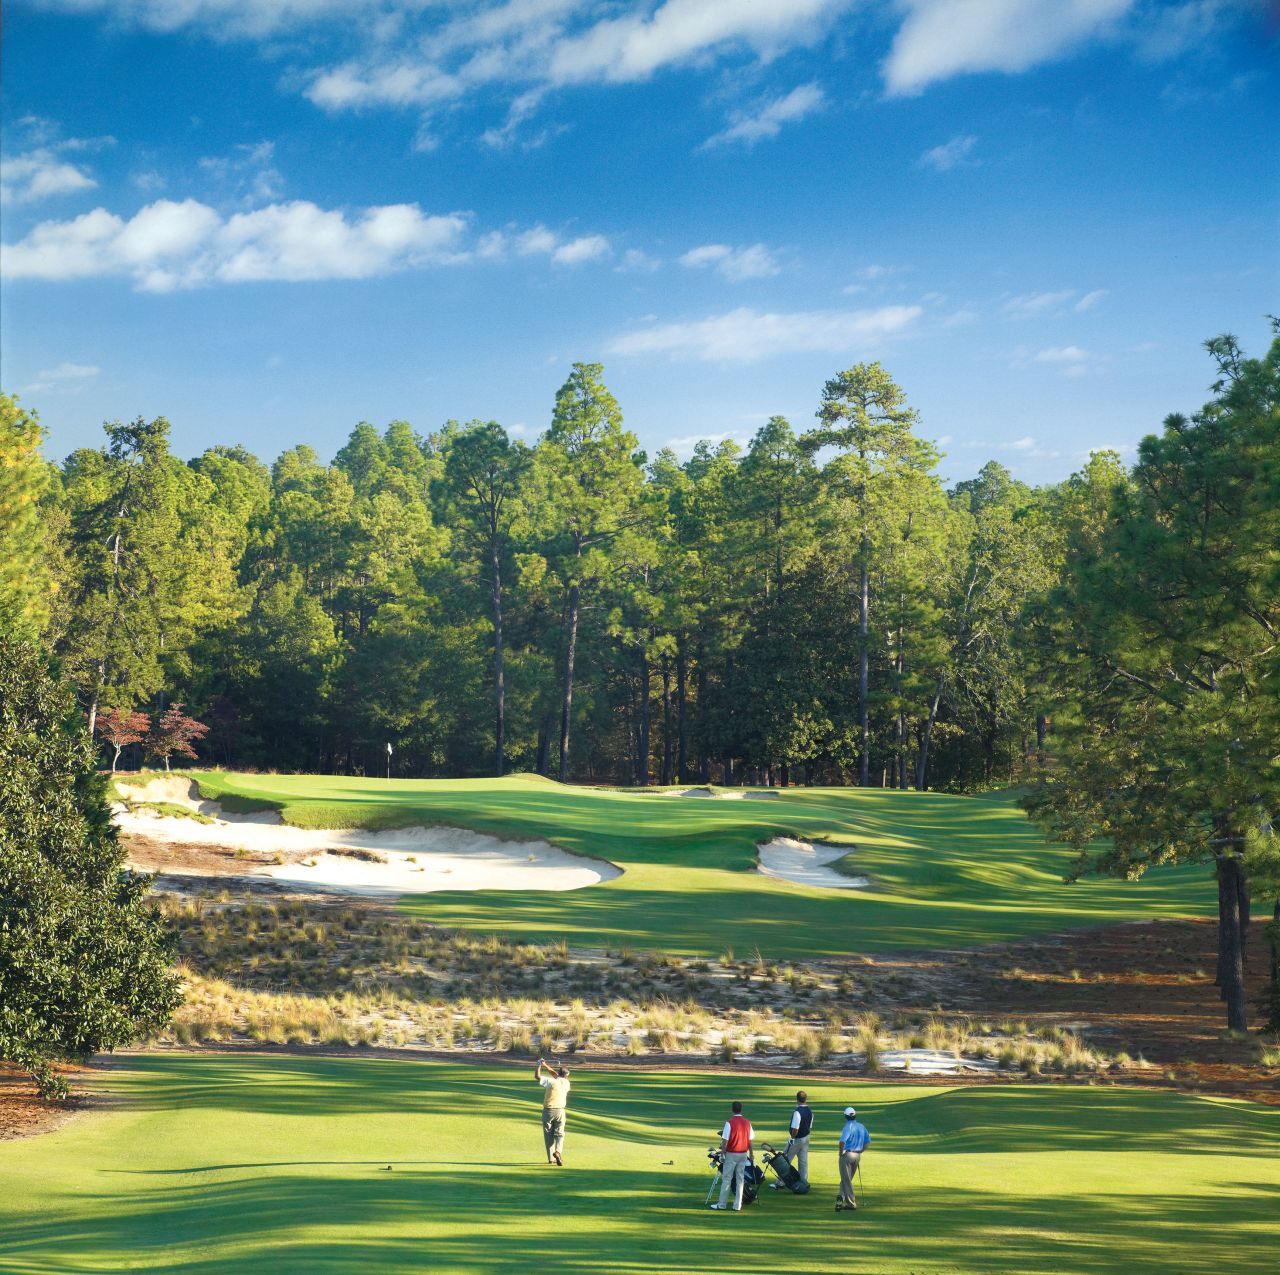 The Pinehurst Resort has eight courses, four designed by Donald Ross, including the legendary No. 2 course, which has hosted one Ryder Cup, one PGA Championship and two U.S. Opens.